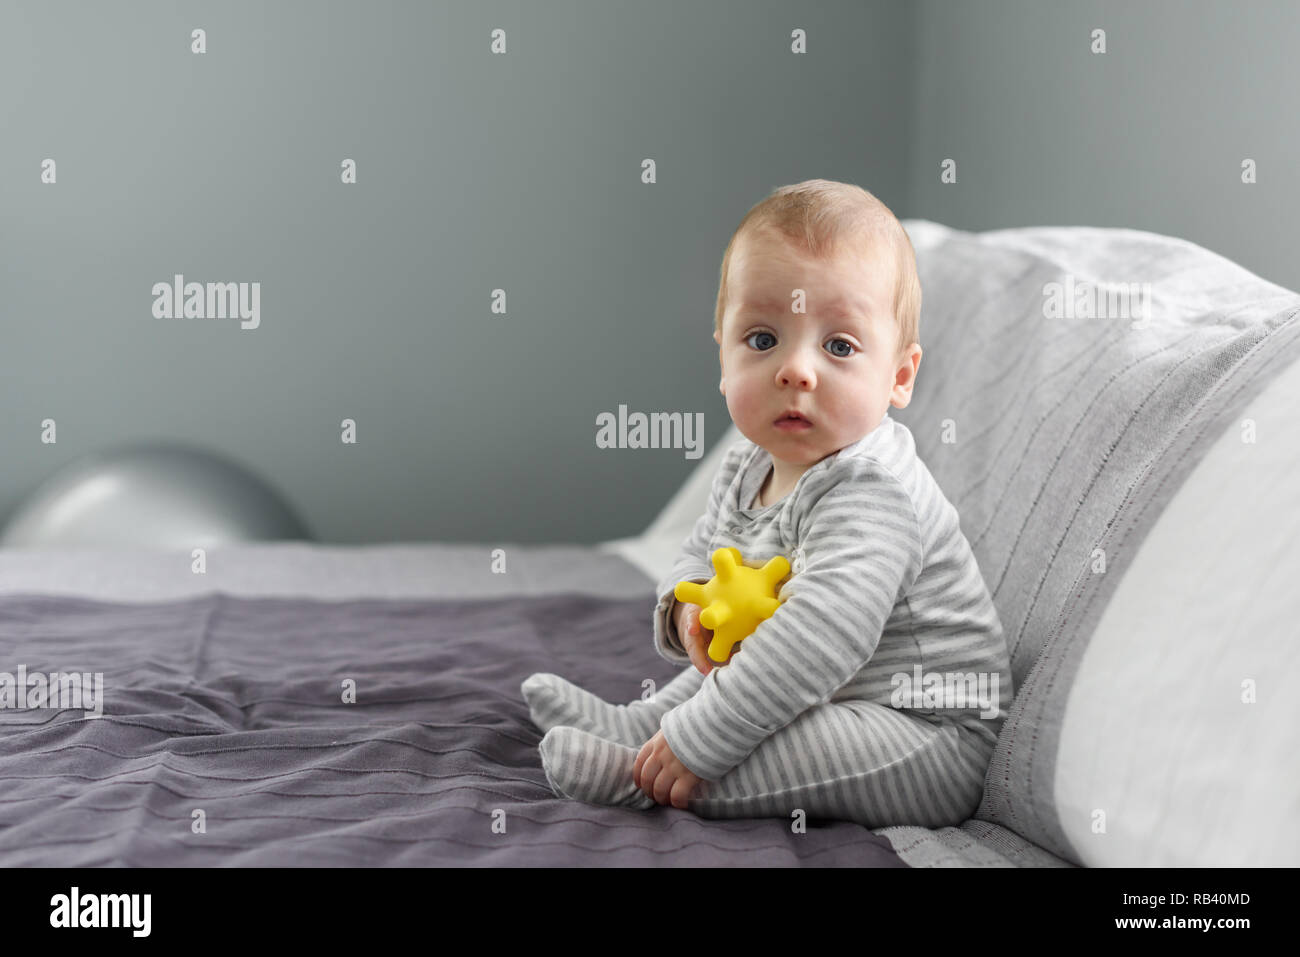 Sitting baby boy on grey carpet with yellow ball toy. Motherhood and new life concept Stock Photo